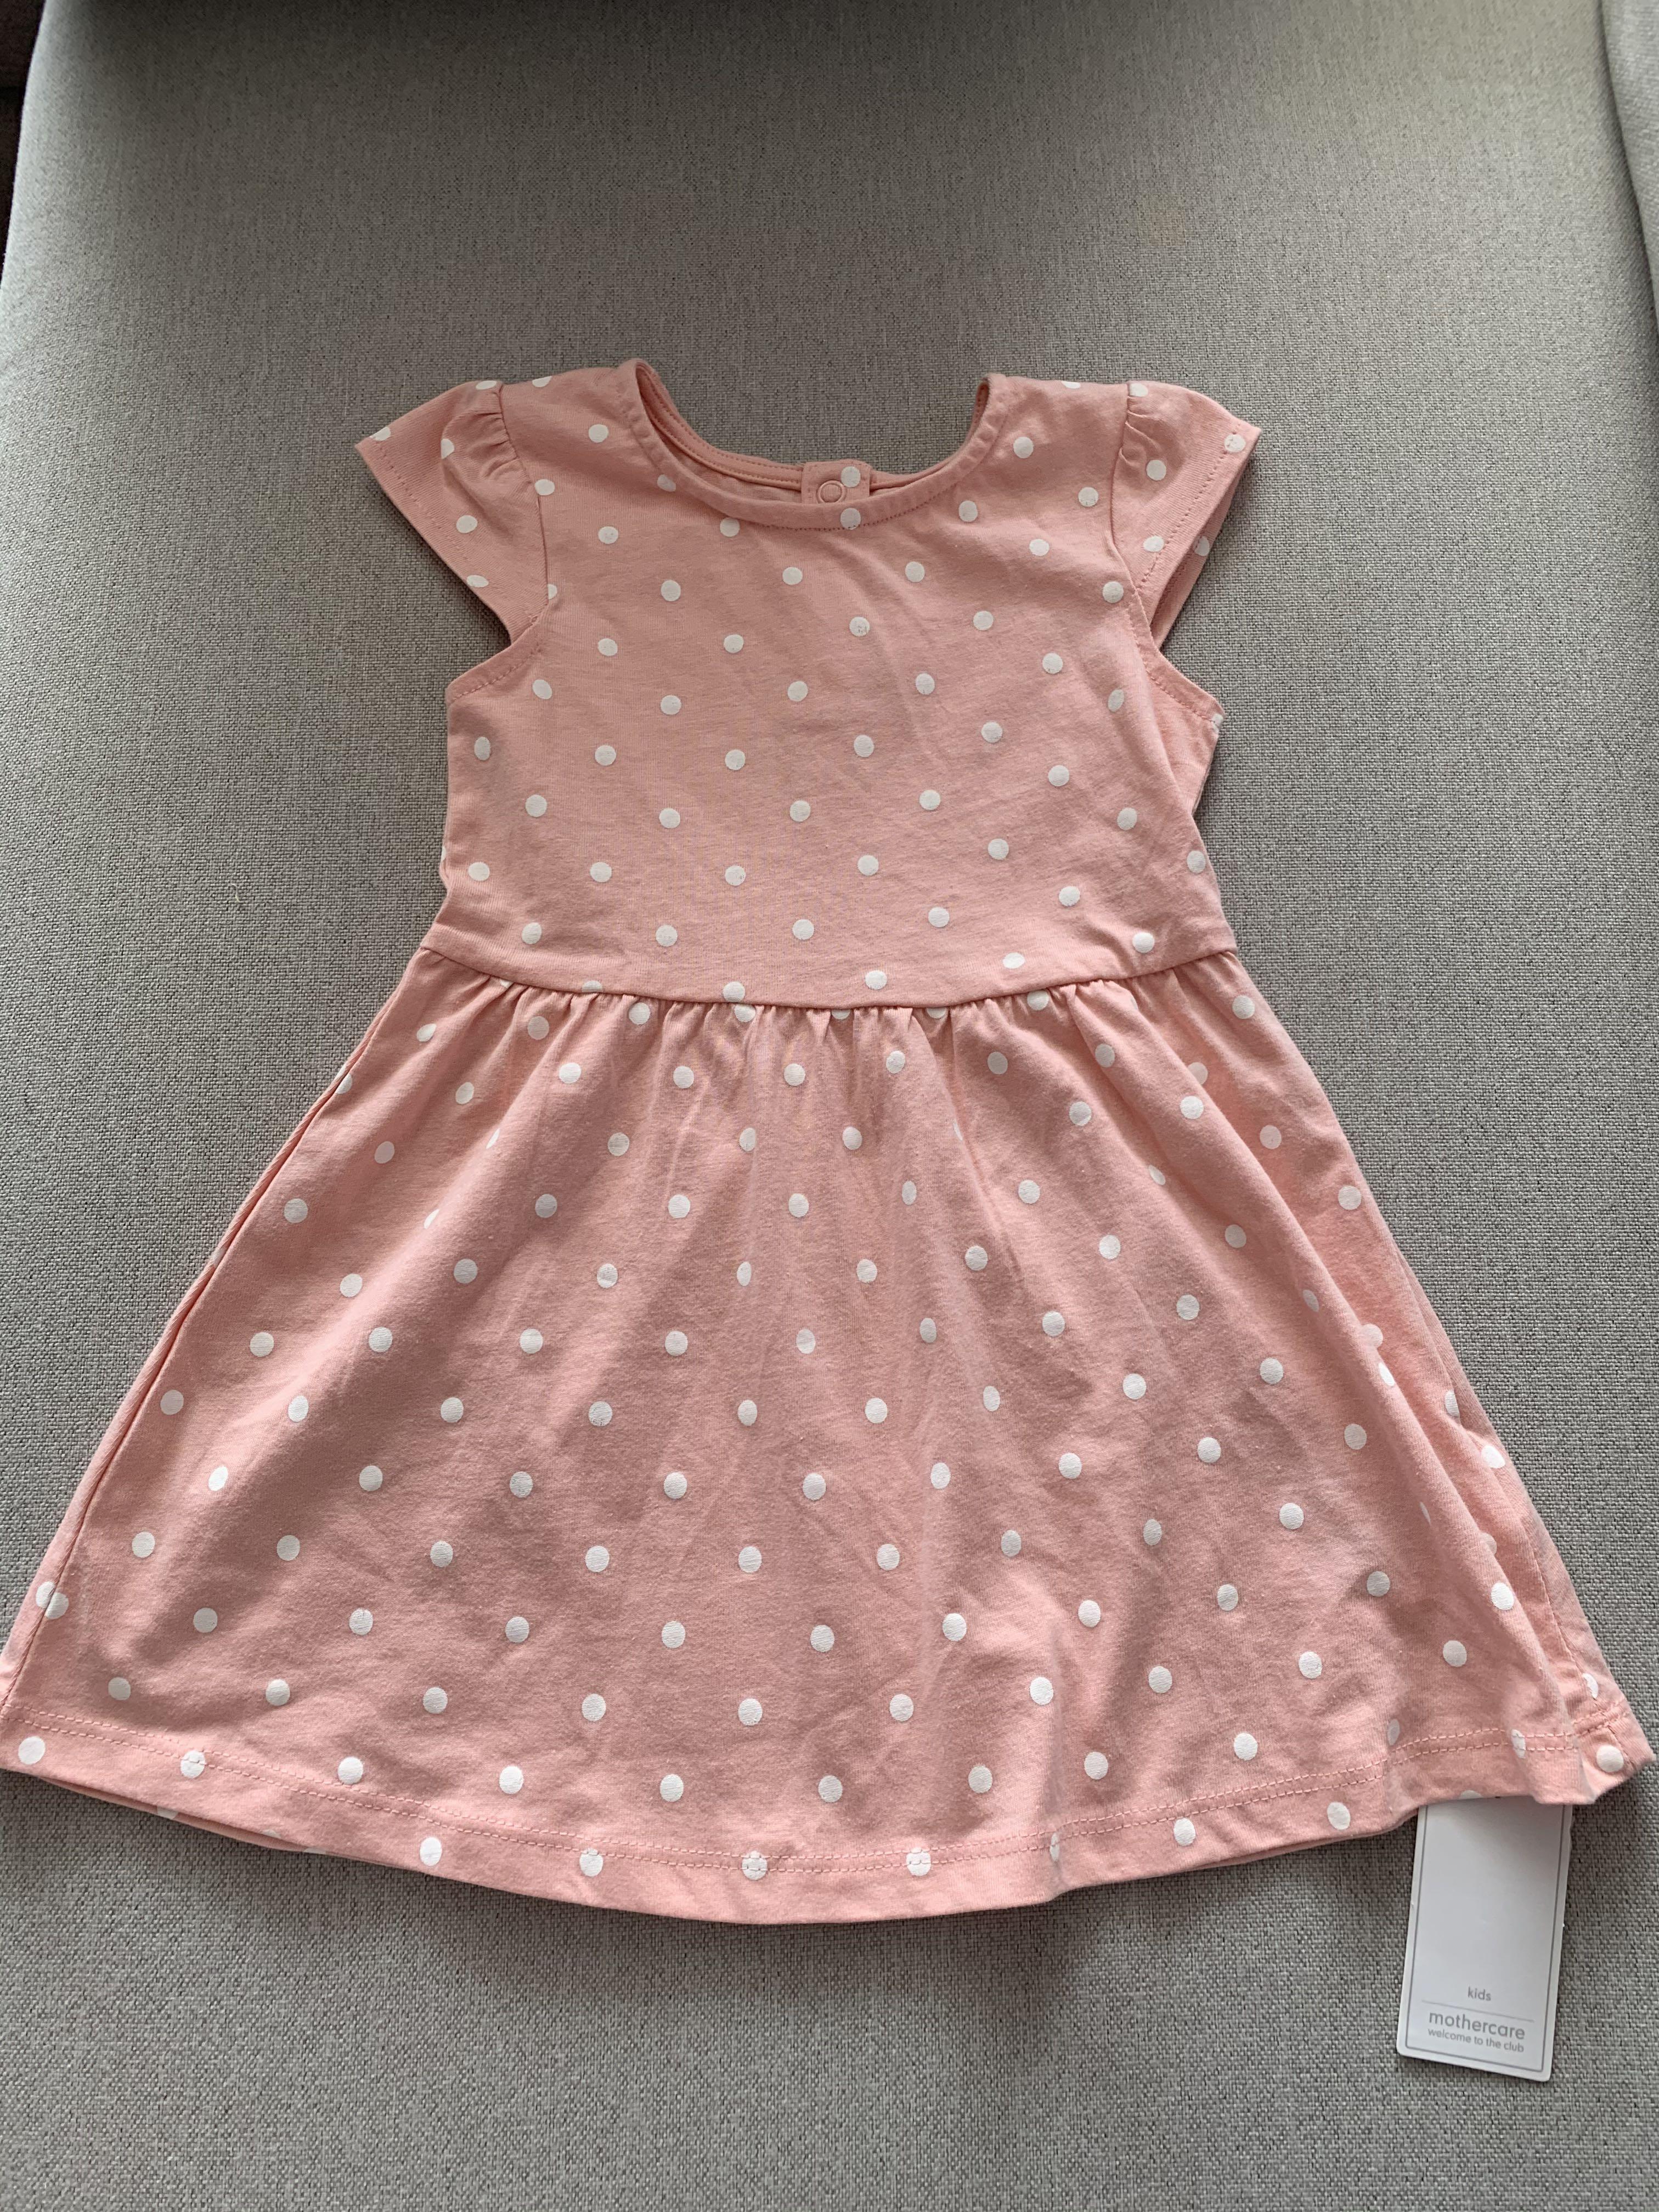 Mothercare BNWT Mothercare Dress New Baby 